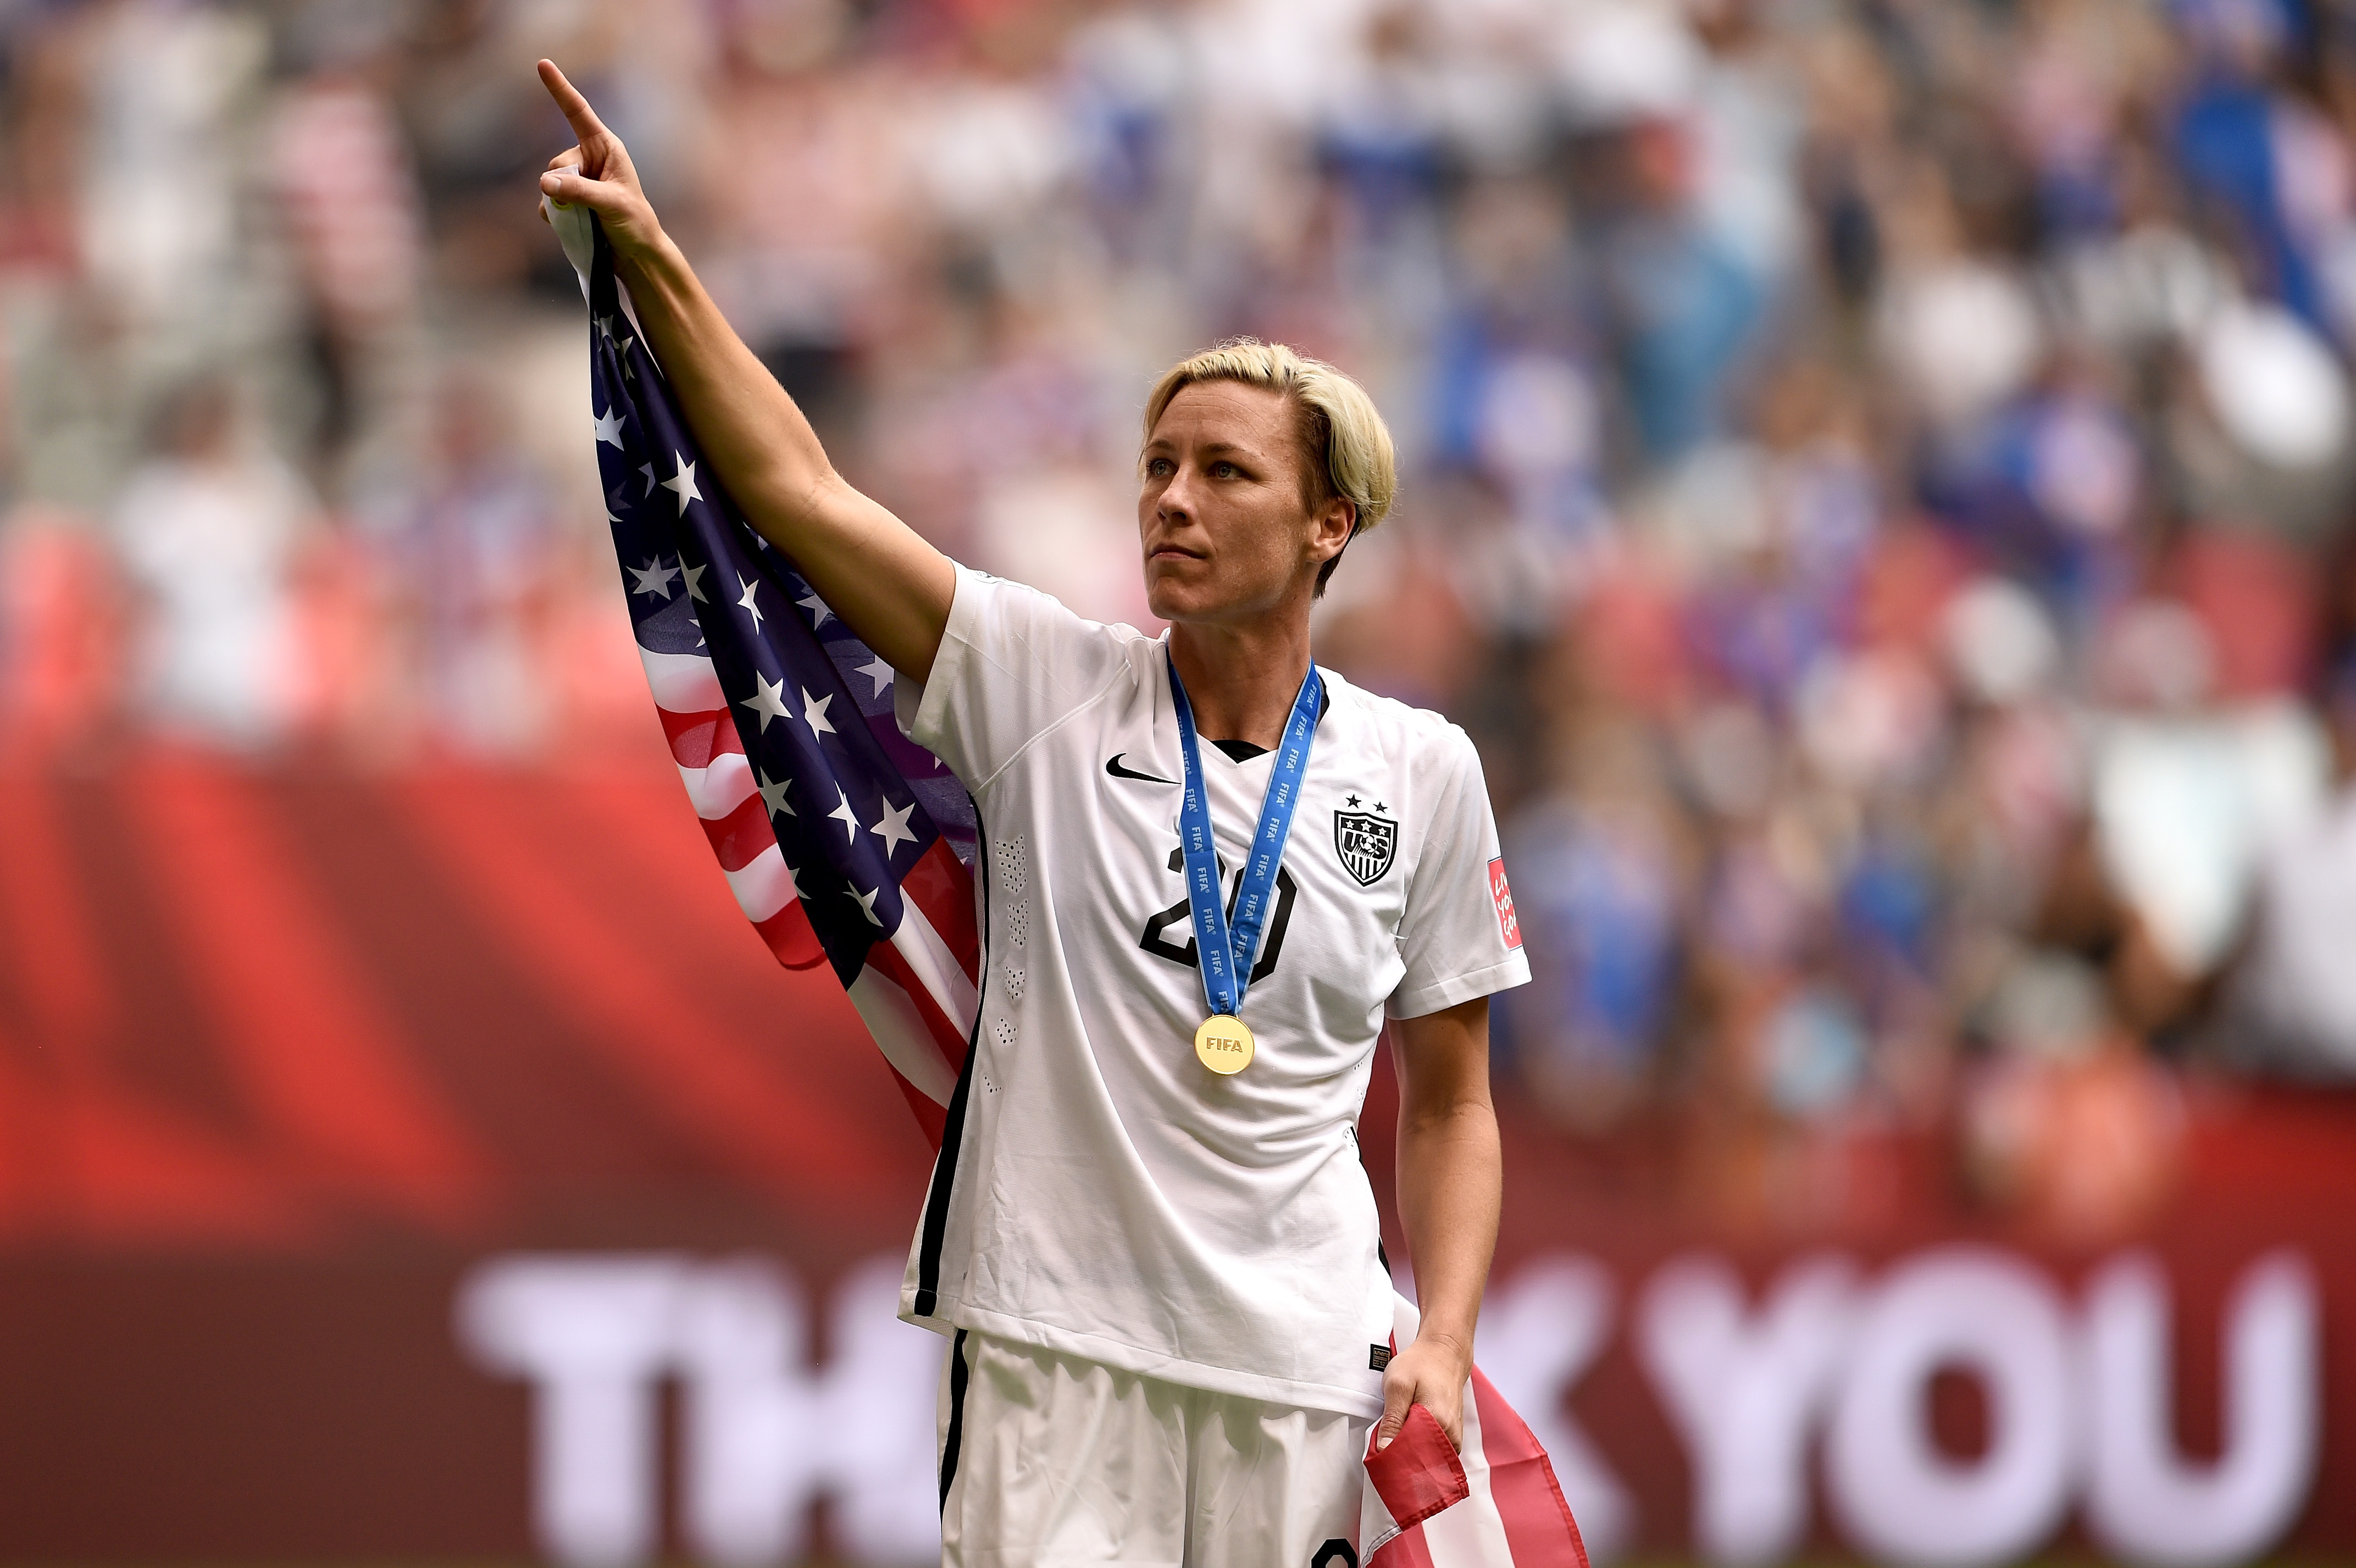 Abby Wambach #20 of the United States celebrates the 5-2 victory against Japan in the FIFA Women's World Cup Canada 2015 Final at BC Place Stadium on July 5, 2015 in Vancouver, Canada. (Dennis Grombkowski&mdash;Getty Images)